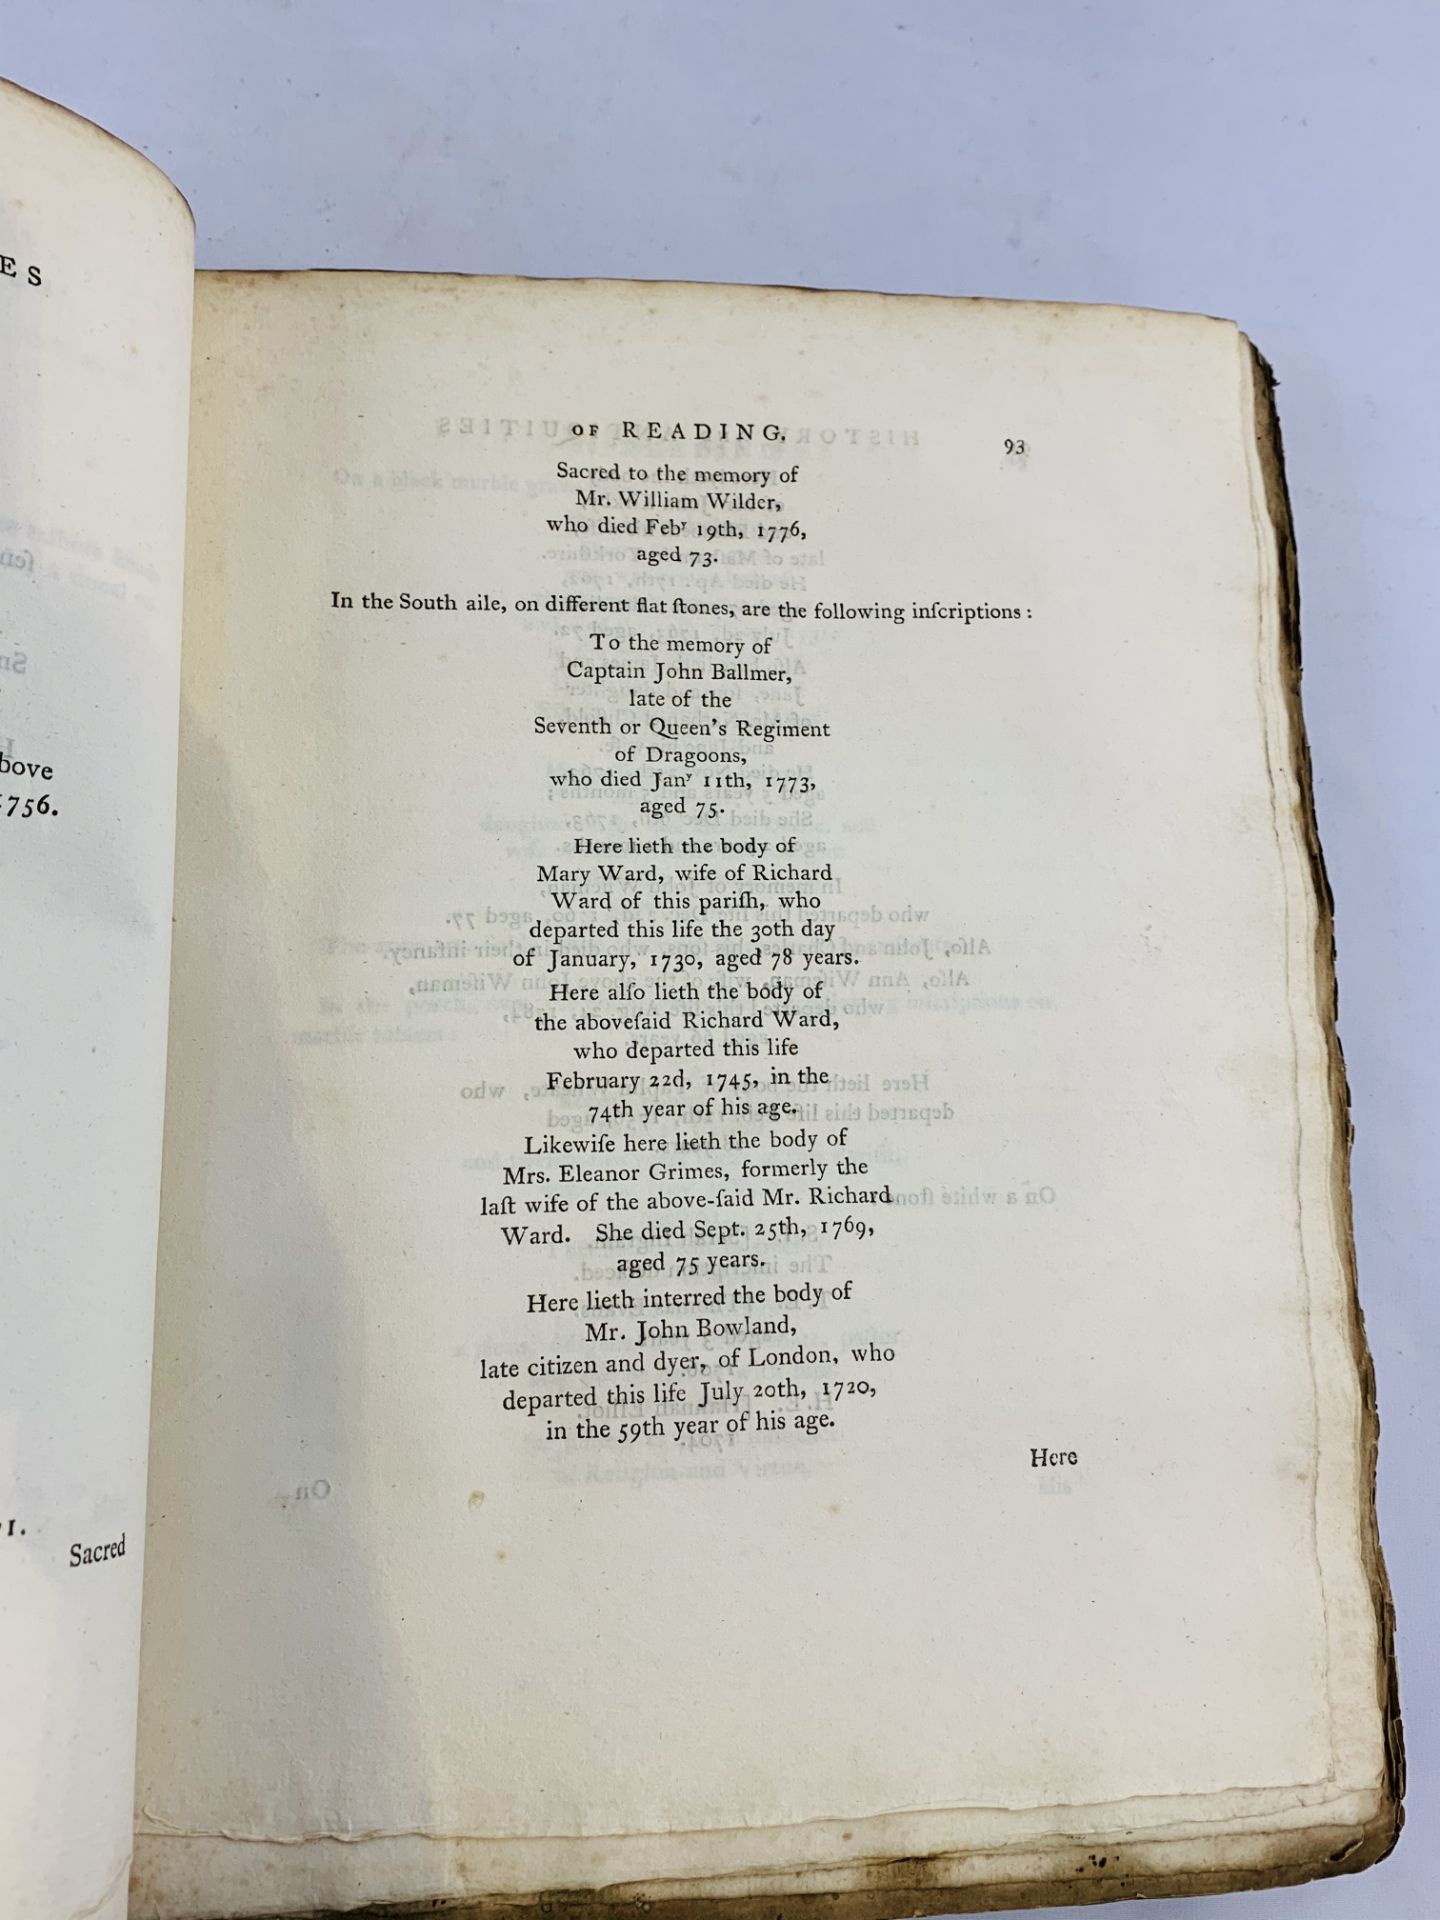 An original copy of The History and Antiquities of Reading, by Rev. Coates, published 1802. - Image 2 of 5